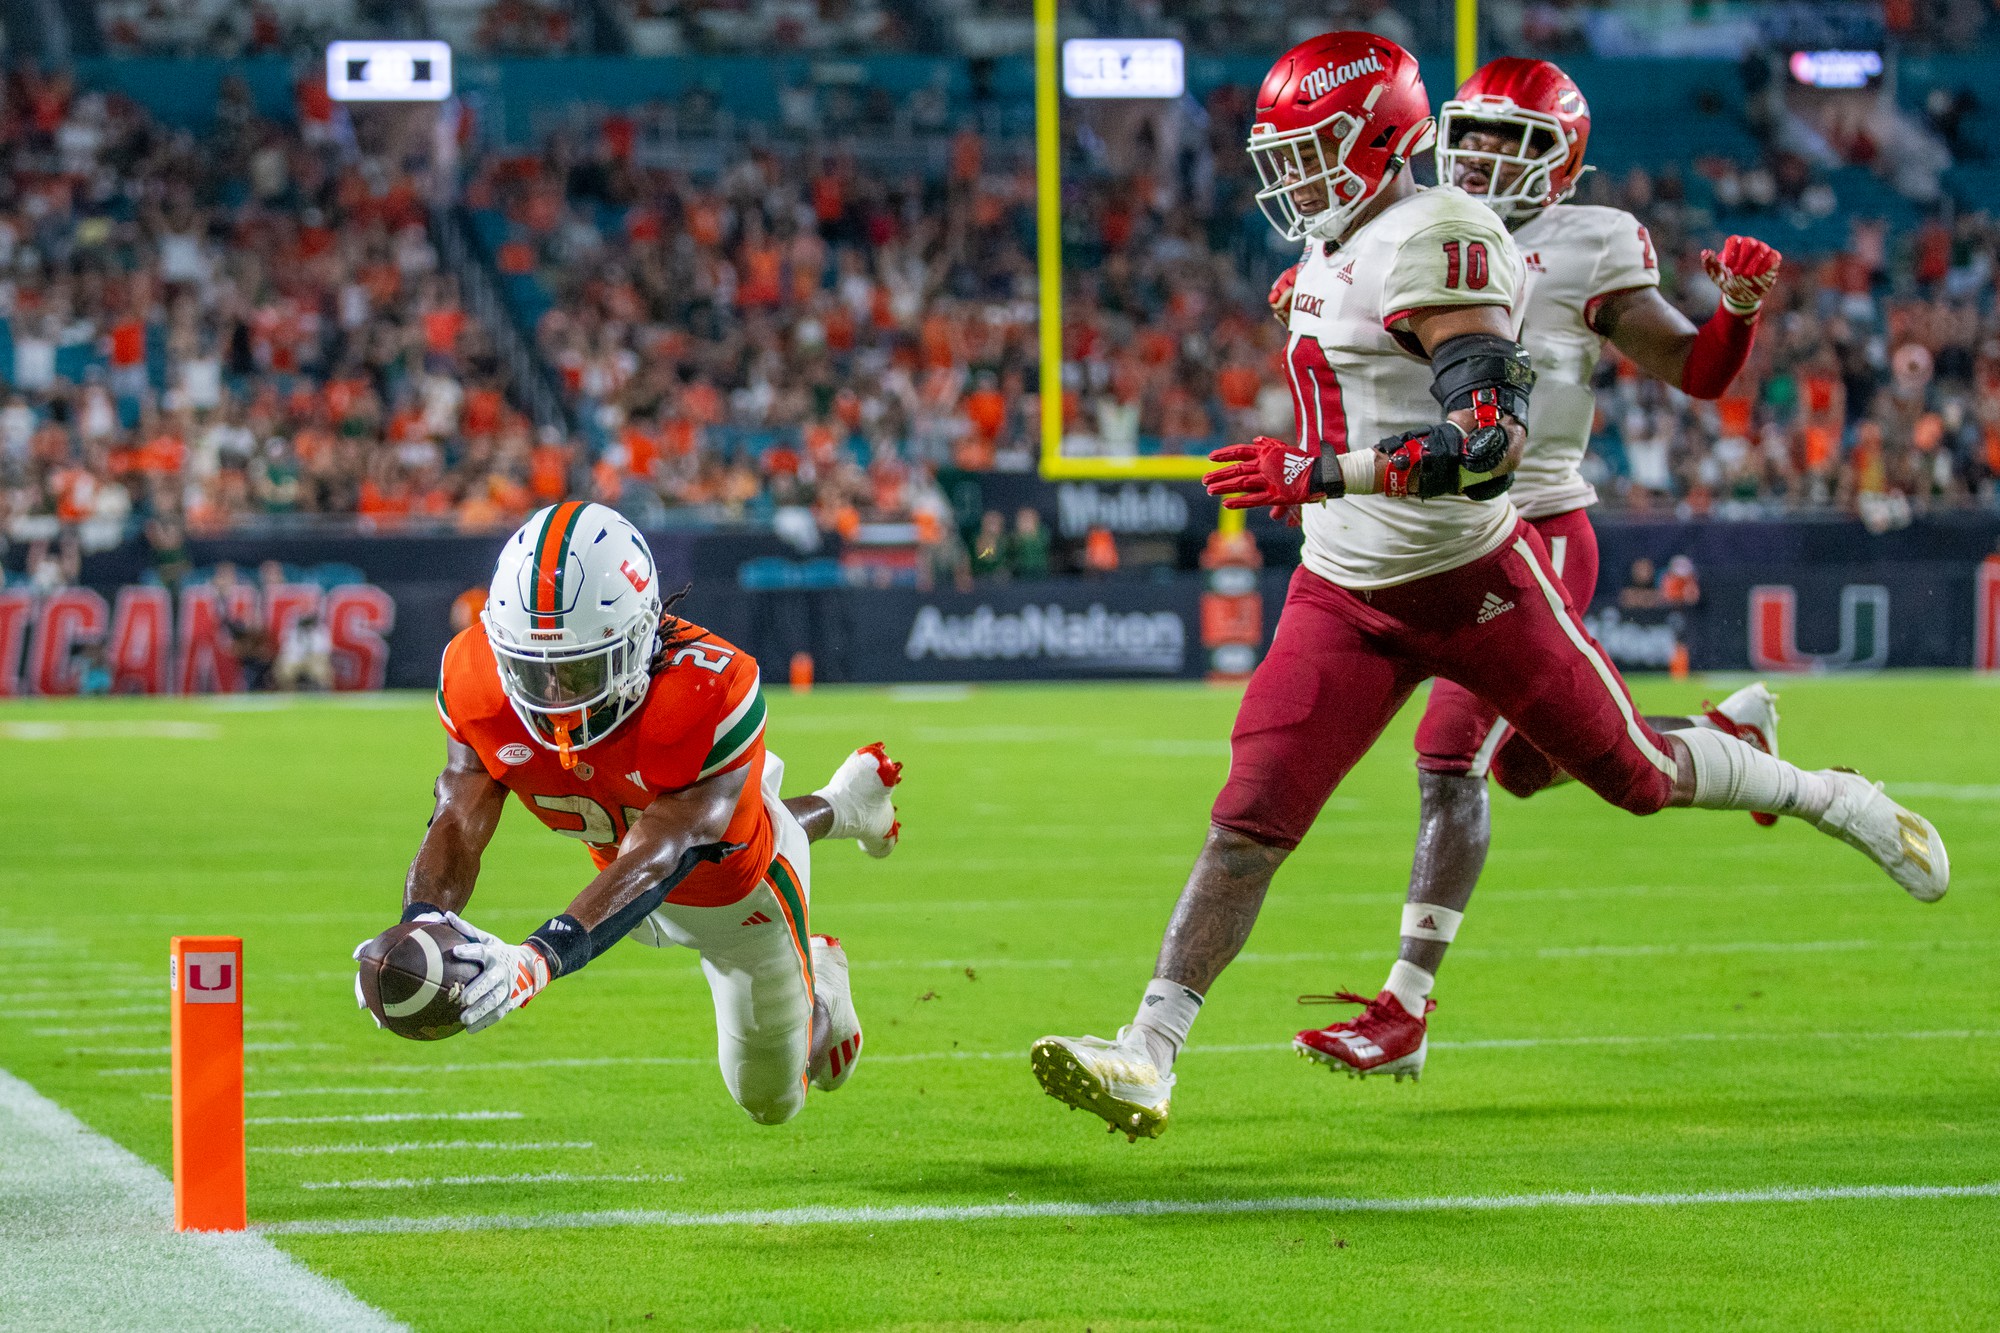 Rushing attack carries Hurricanes to 383 victory against Miami of Ohio